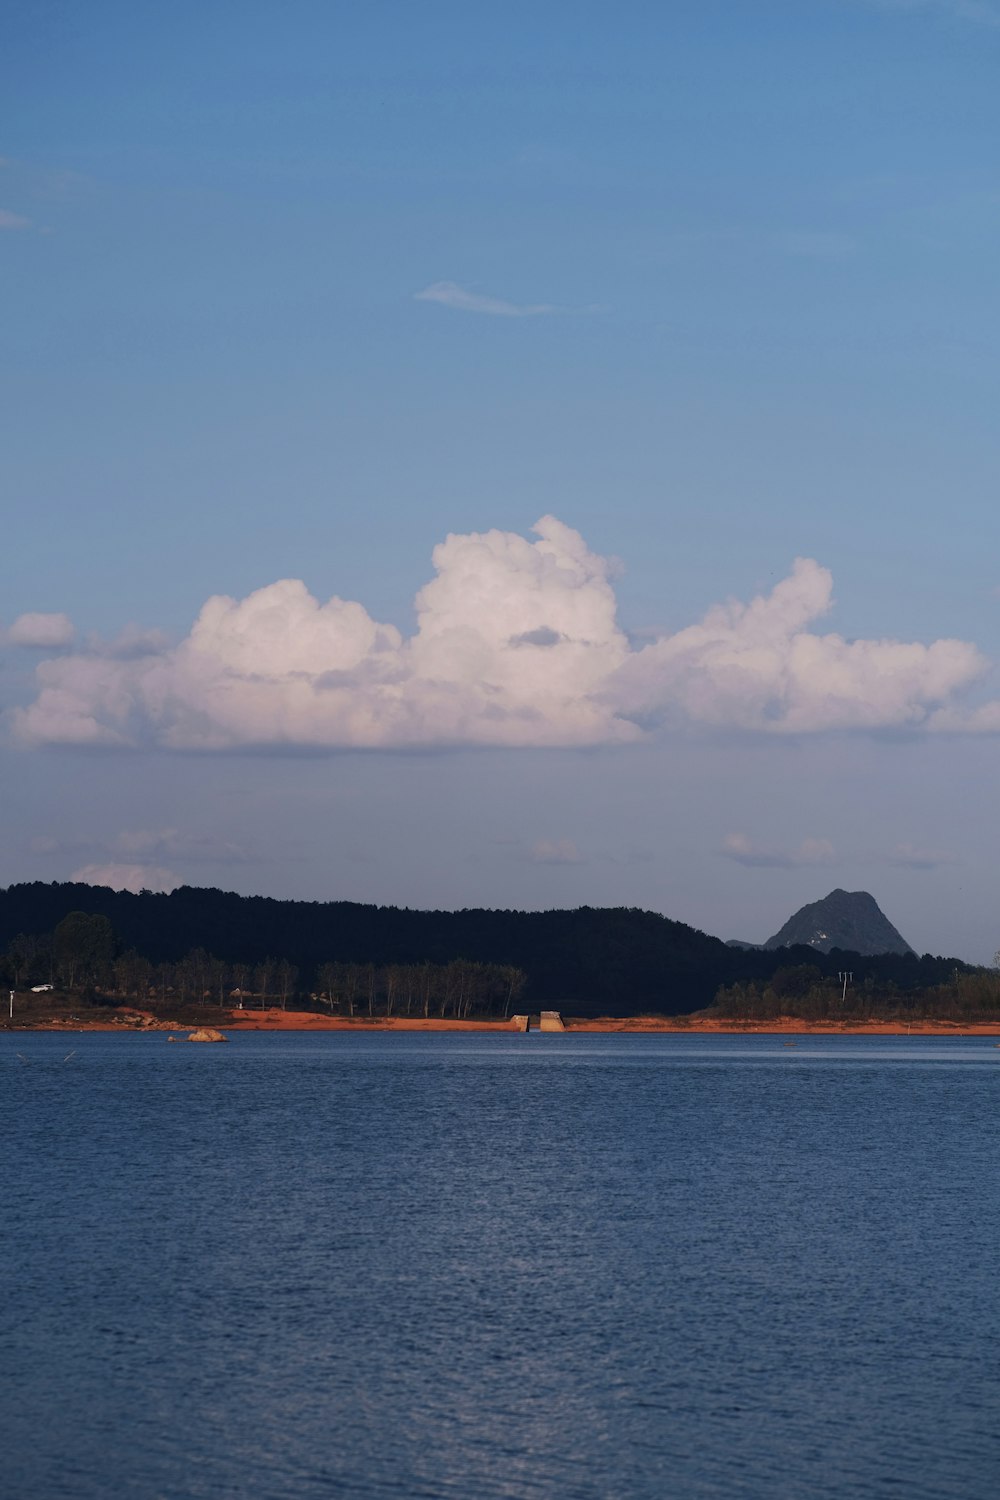 a large body of water with a mountain in the background